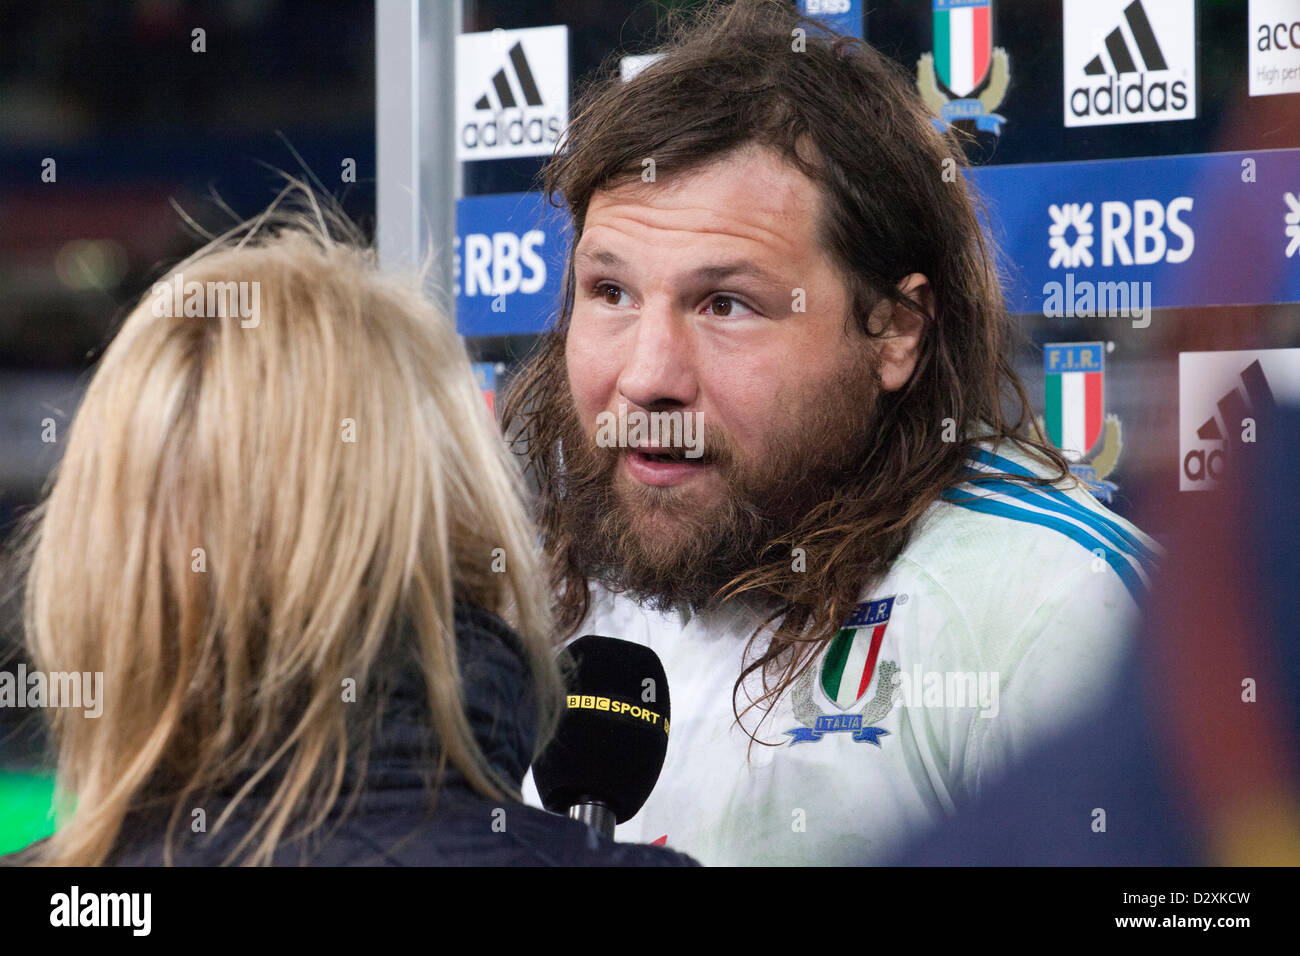 February 3rd 2013. Rome, Italy. Six Nations rugby. Italy vs France. Martin Castrogiovanni interviewed after the match against Fr Stock Photo